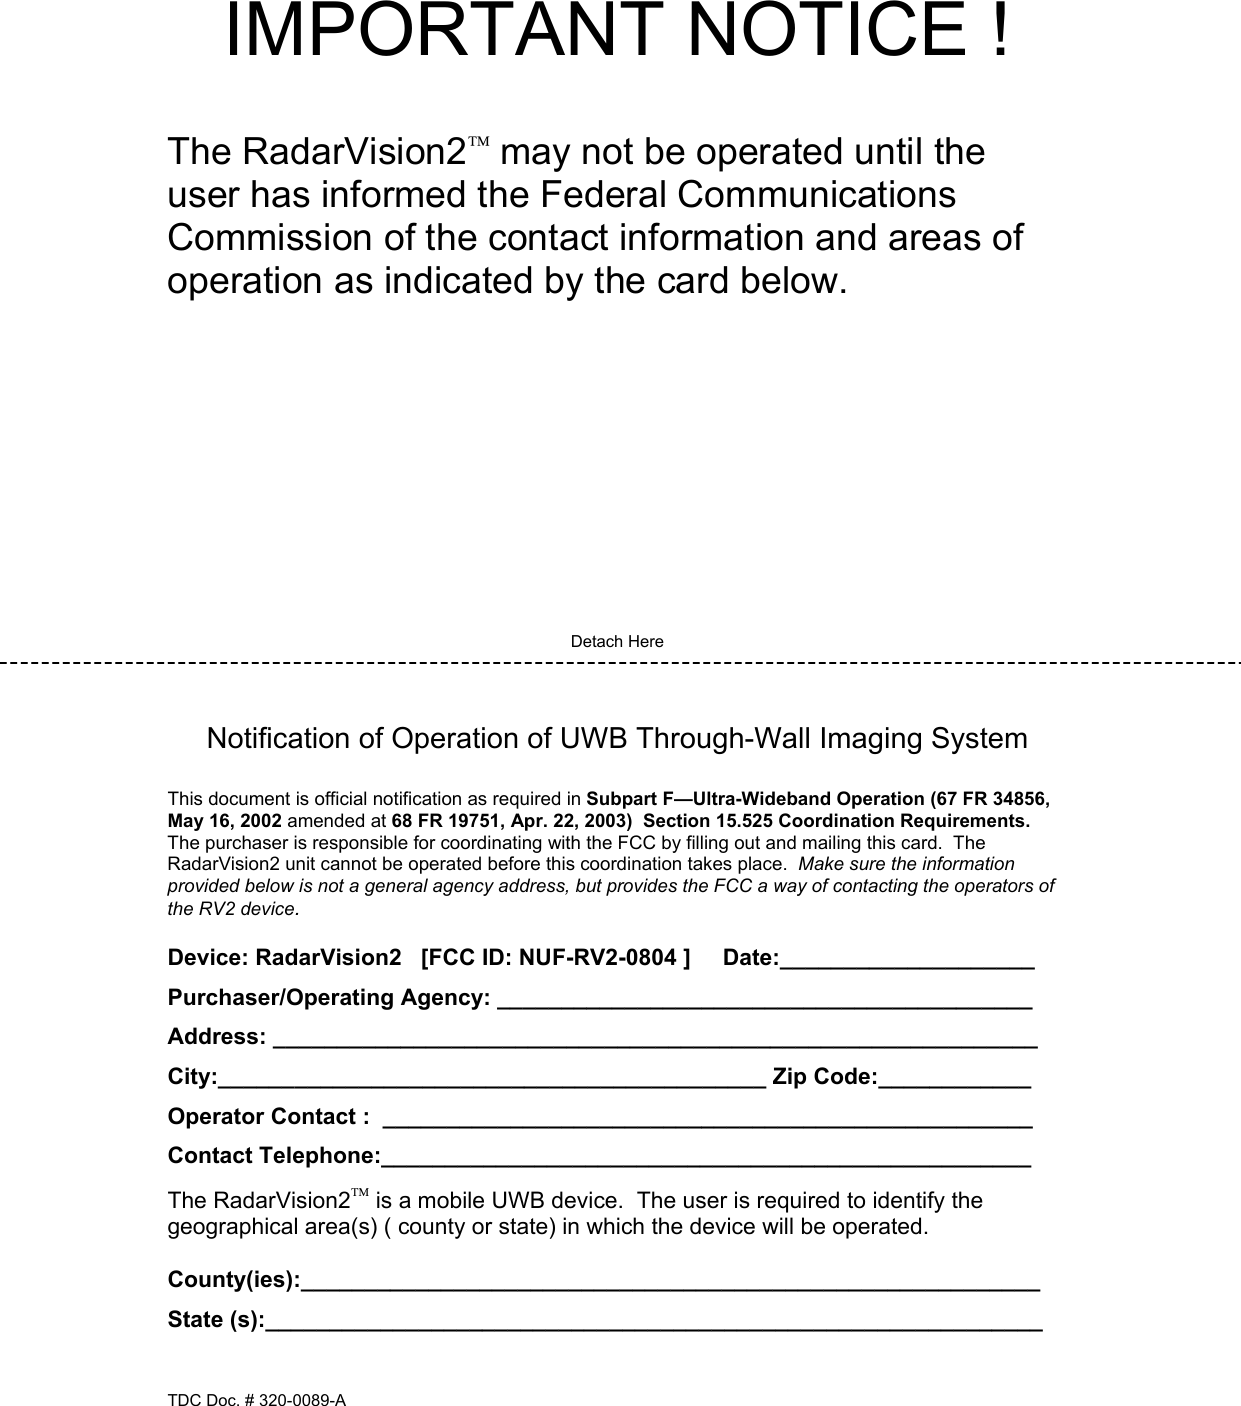 IMPORTANT NOTICE !   The RadarVision2 may not be operated until the user has informed the Federal Communications Commission of the contact information and areas of operation as indicated by the card below.            Detach Here   Notification of Operation of UWB Through-Wall Imaging System  This document is official notification as required in Subpart F—Ultra-Wideband Operation (67 FR 34856, May 16, 2002 amended at 68 FR 19751, Apr. 22, 2003)  Section 15.525 Coordination Requirements.  The purchaser is responsible for coordinating with the FCC by filling out and mailing this card.  The RadarVision2 unit cannot be operated before this coordination takes place.  Make sure the information provided below is not a general agency address, but provides the FCC a way of contacting the operators of the RV2 device.  Device: RadarVision2   [FCC ID: NUF-RV2-0804 ]     Date:____________________ Purchaser/Operating Agency: __________________________________________ Address: ____________________________________________________________ City:___________________________________________ Zip Code:____________ Operator Contact :  ___________________________________________________ Contact Telephone:___________________________________________________ The RadarVision2 is a mobile UWB device.  The user is required to identify the geographical area(s) ( county or state) in which the device will be operated.  County(ies):__________________________________________________________ State (s):_____________________________________________________________  TDC Doc. # 320-0089-A 